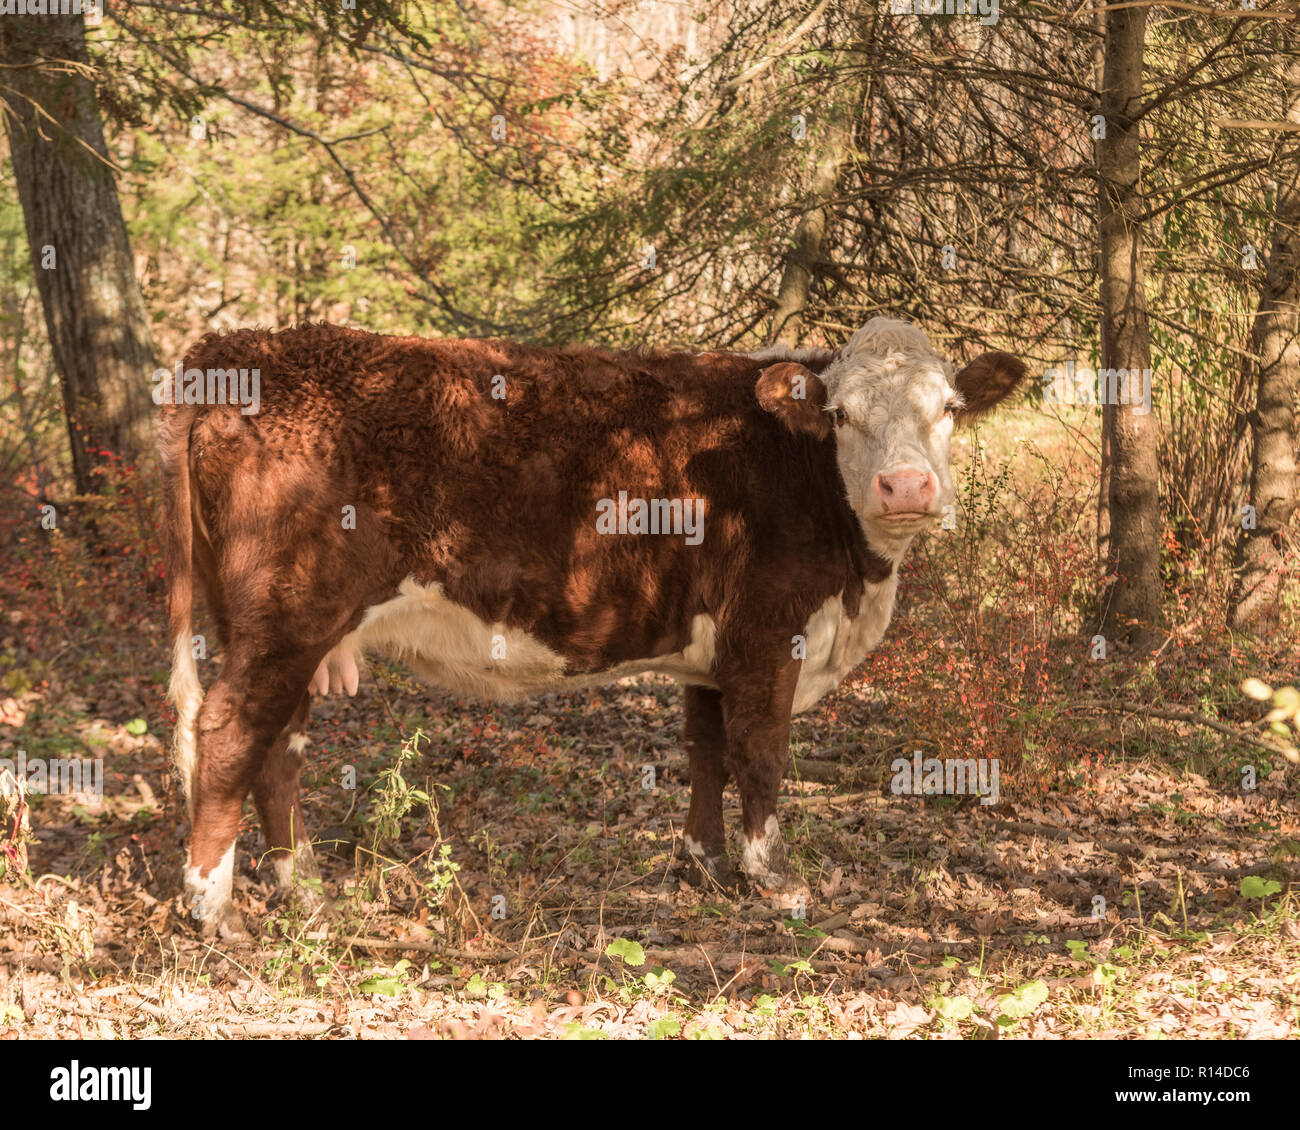 Hereford cow grazing on acorns and grass in autumnal pasture on a sunny autumnal day in New England woods Stock Photo